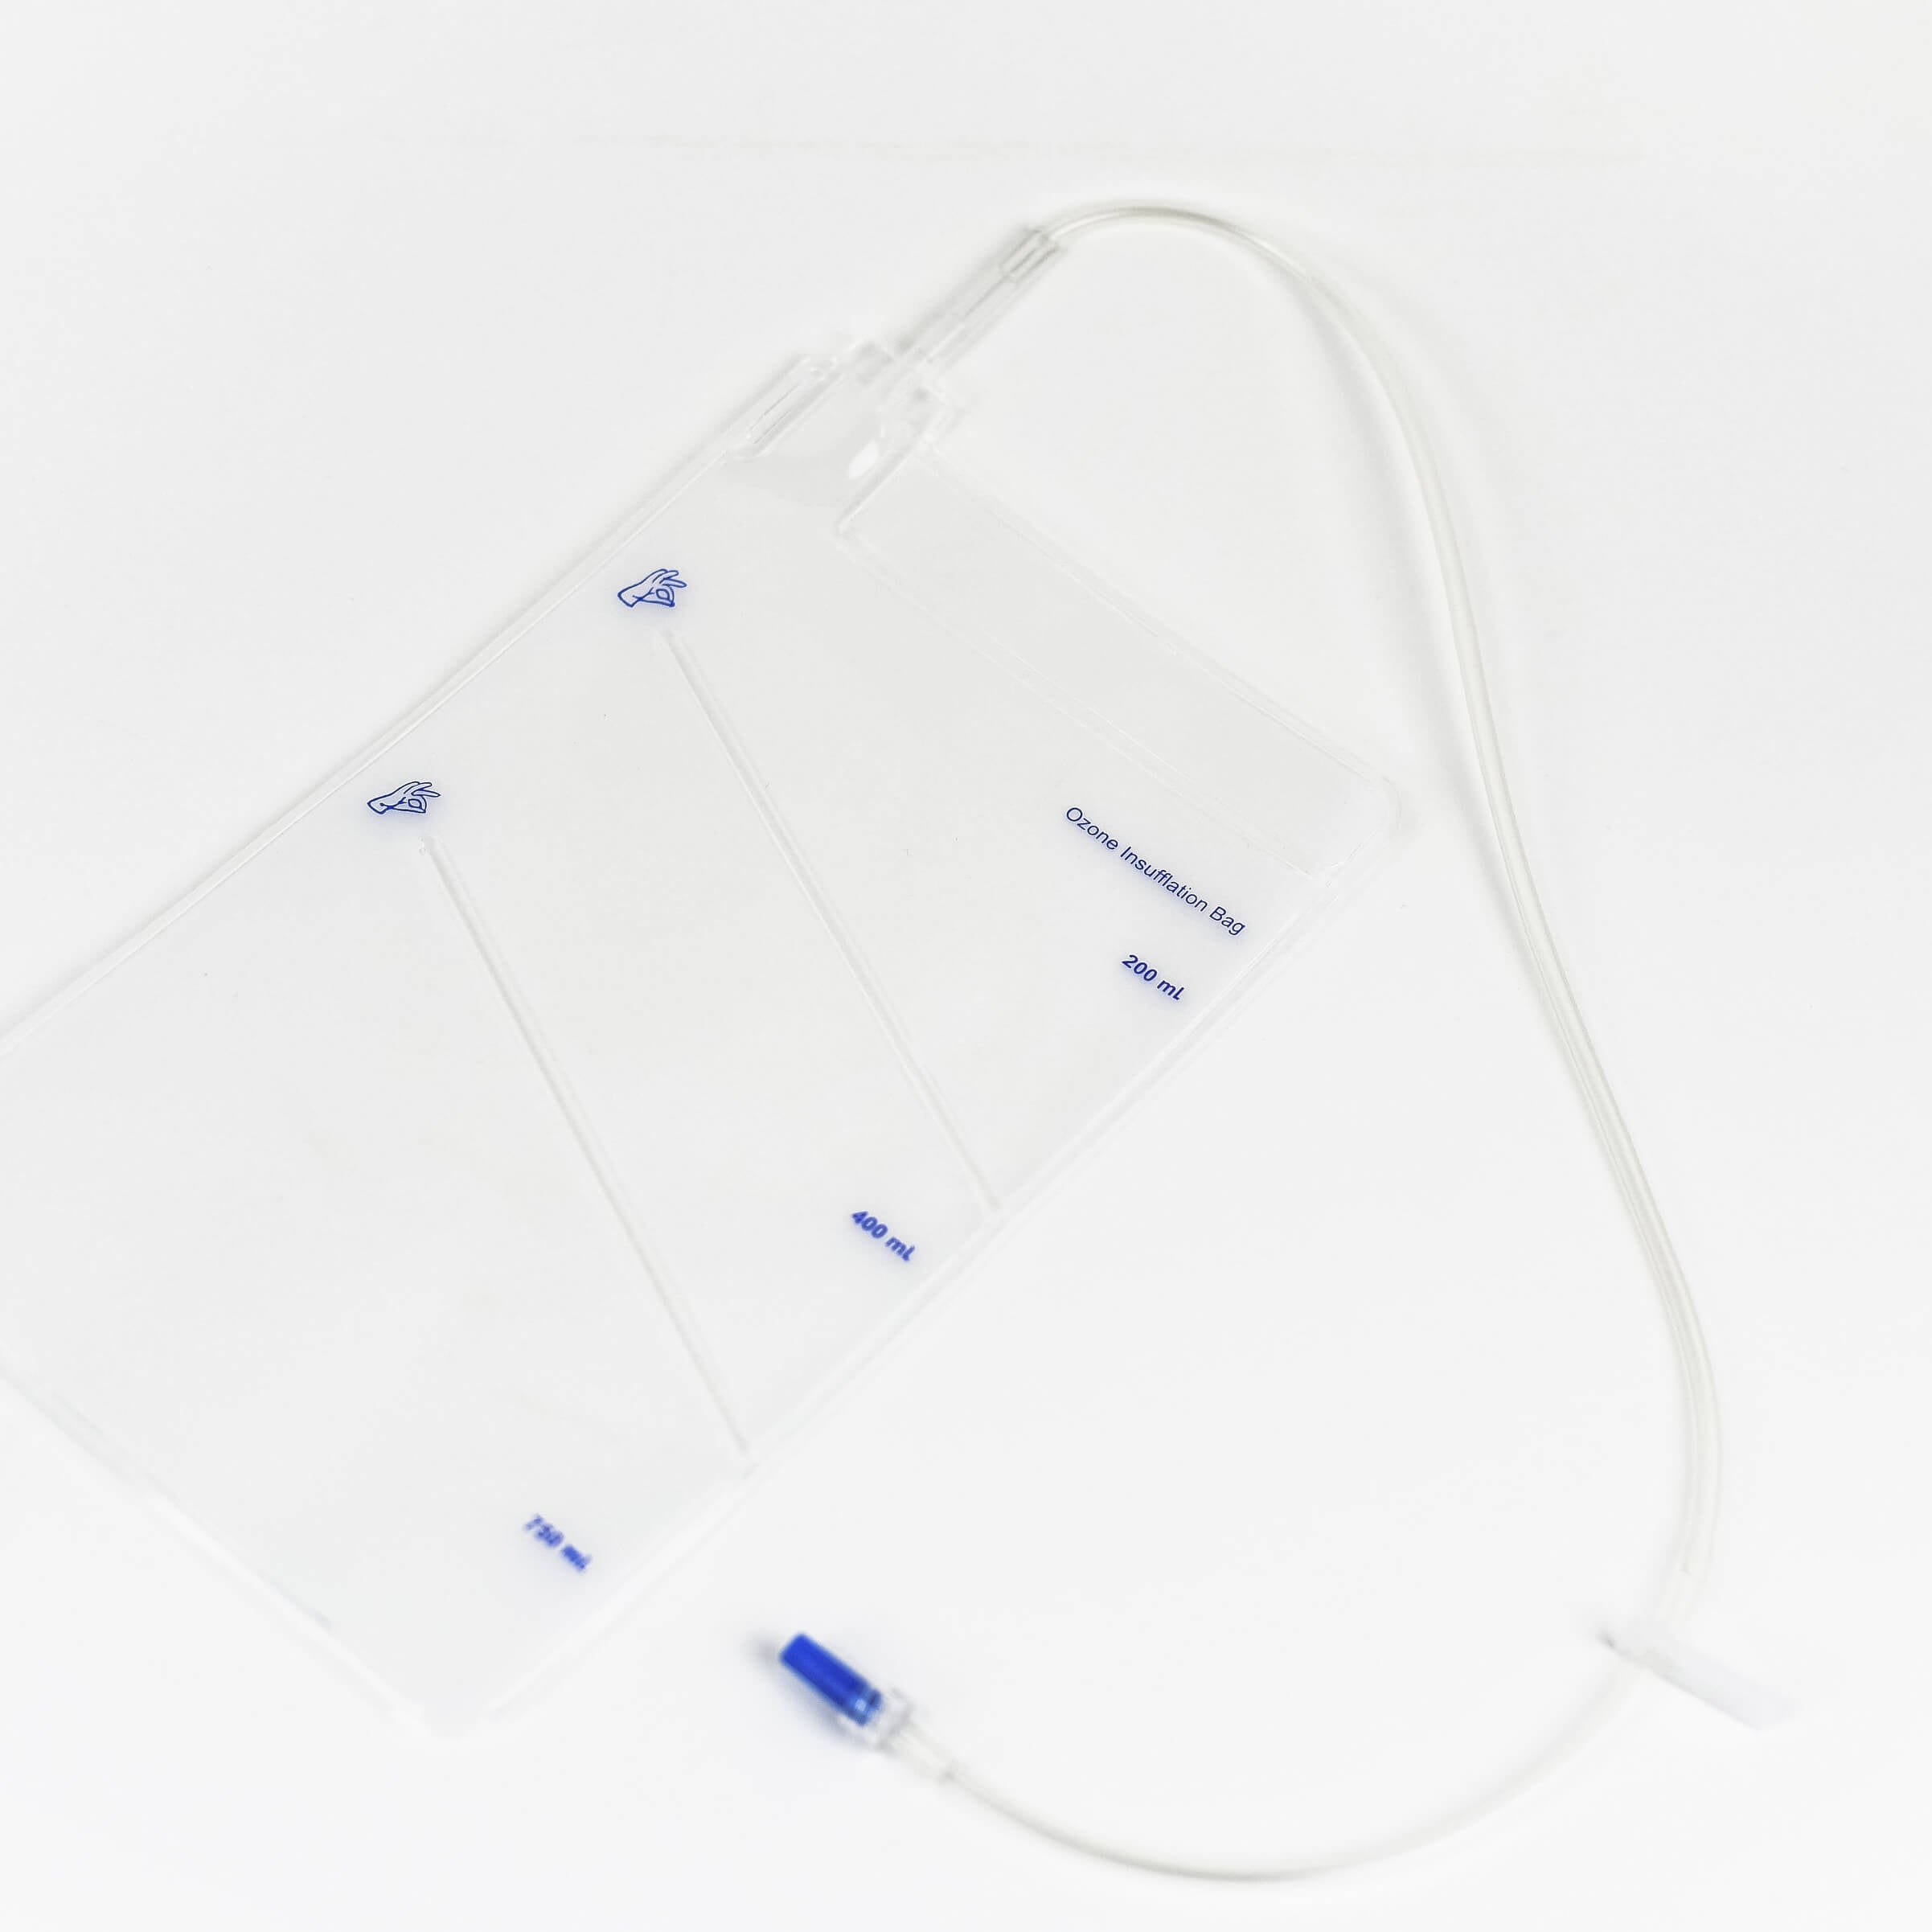 Insufflation bag (2) with catheter (5), package